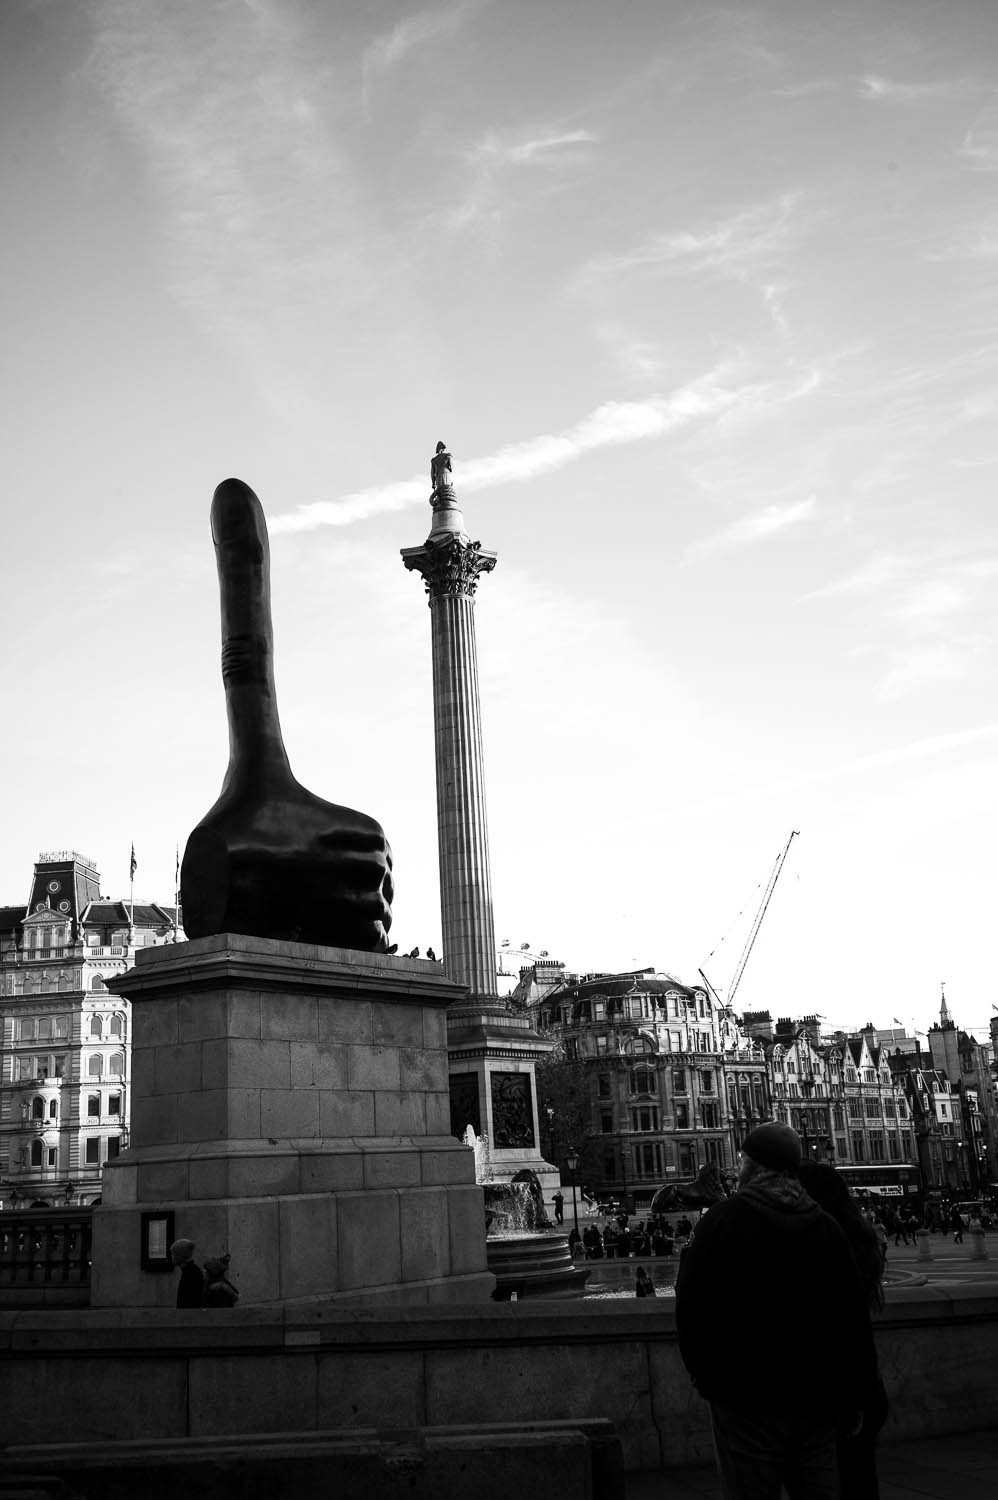 A thumbs up statue outside a museum in London